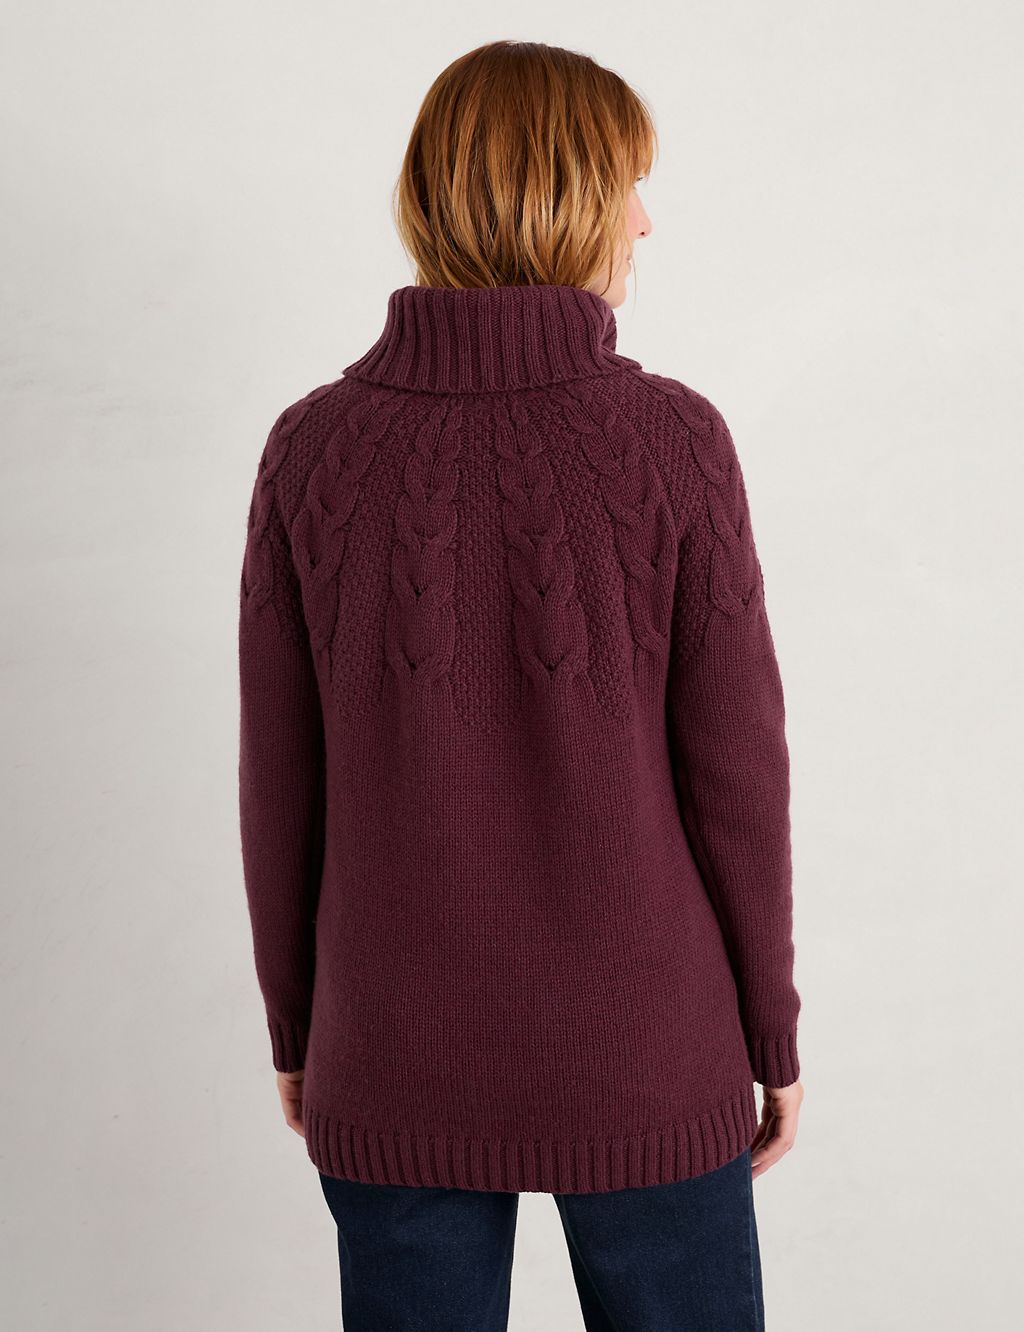 Patterned Roll Neck Jumper with Merino Wool 4 of 5